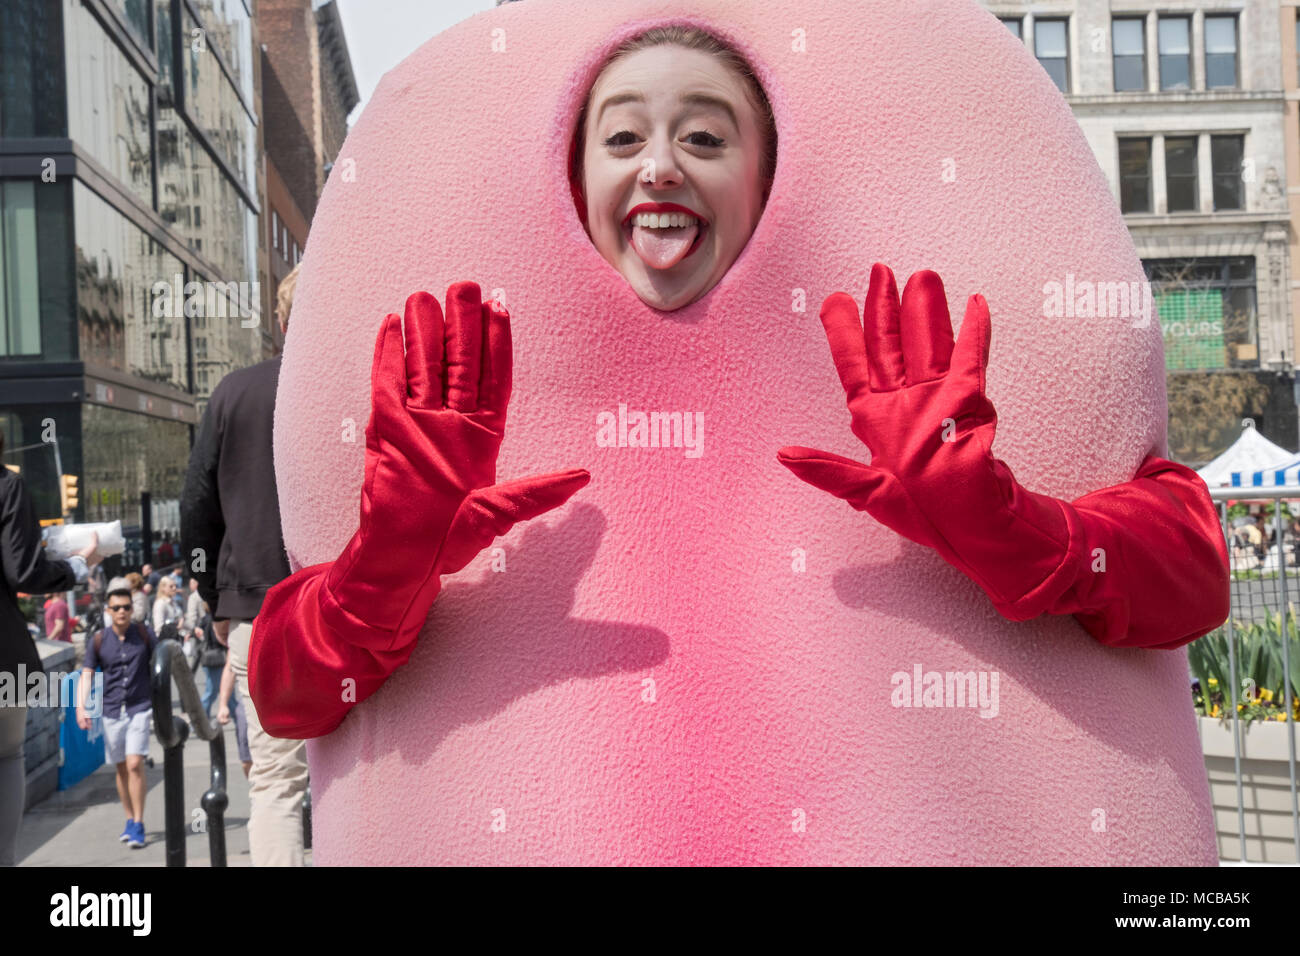 An actress & performance artist in Union Square Park advertising a product to use for cleaning one's tongue. In Manhattan, New York City. Stock Photo